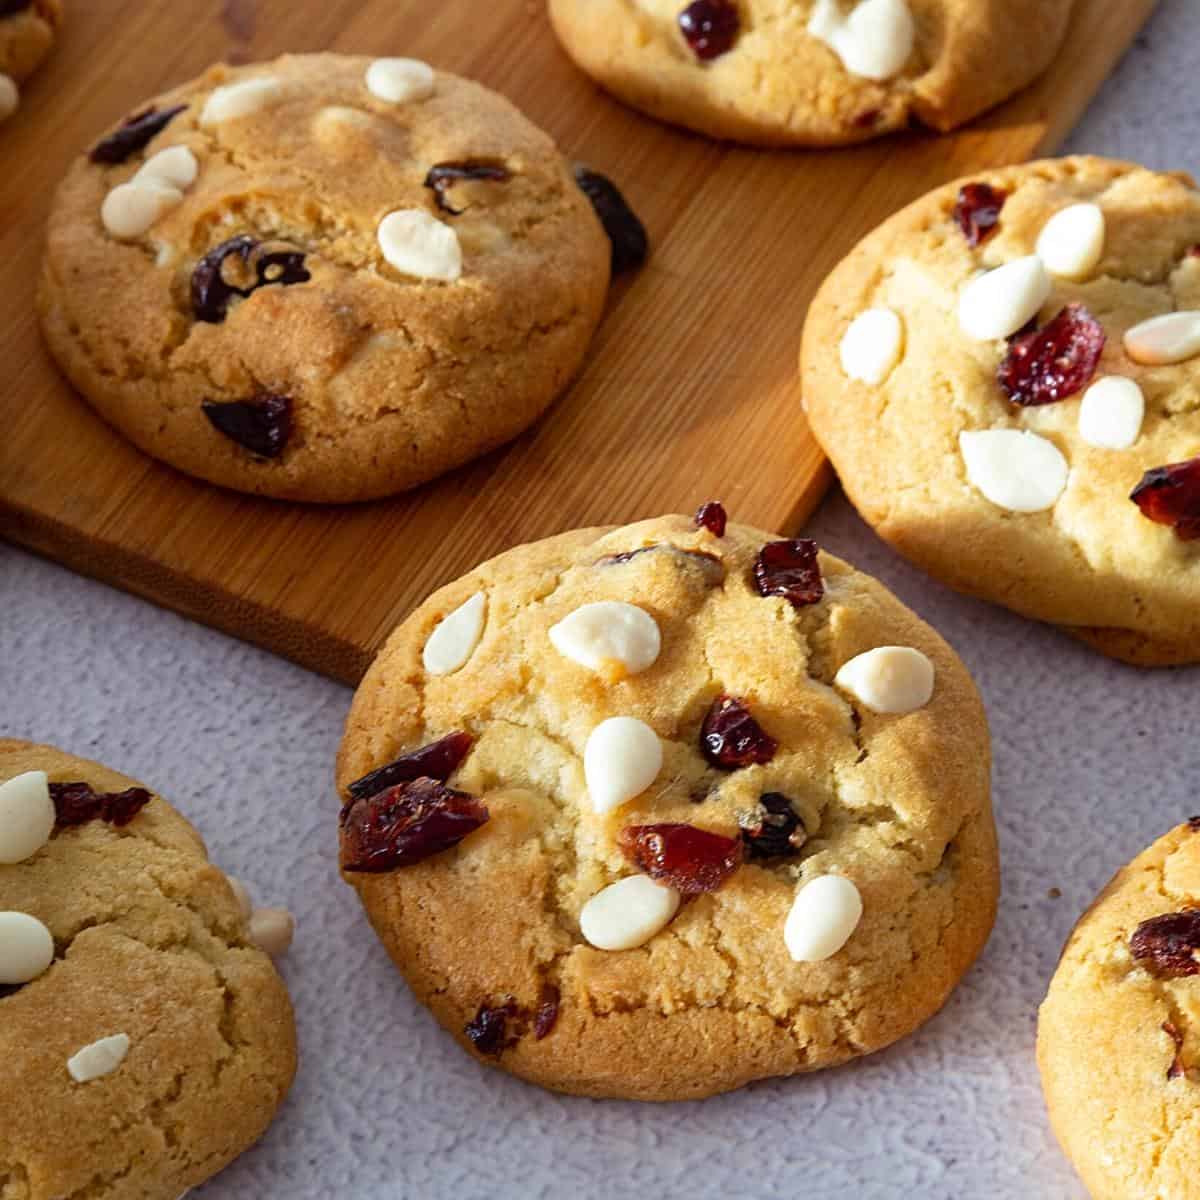 Chocolate chip cookies with cranberry.